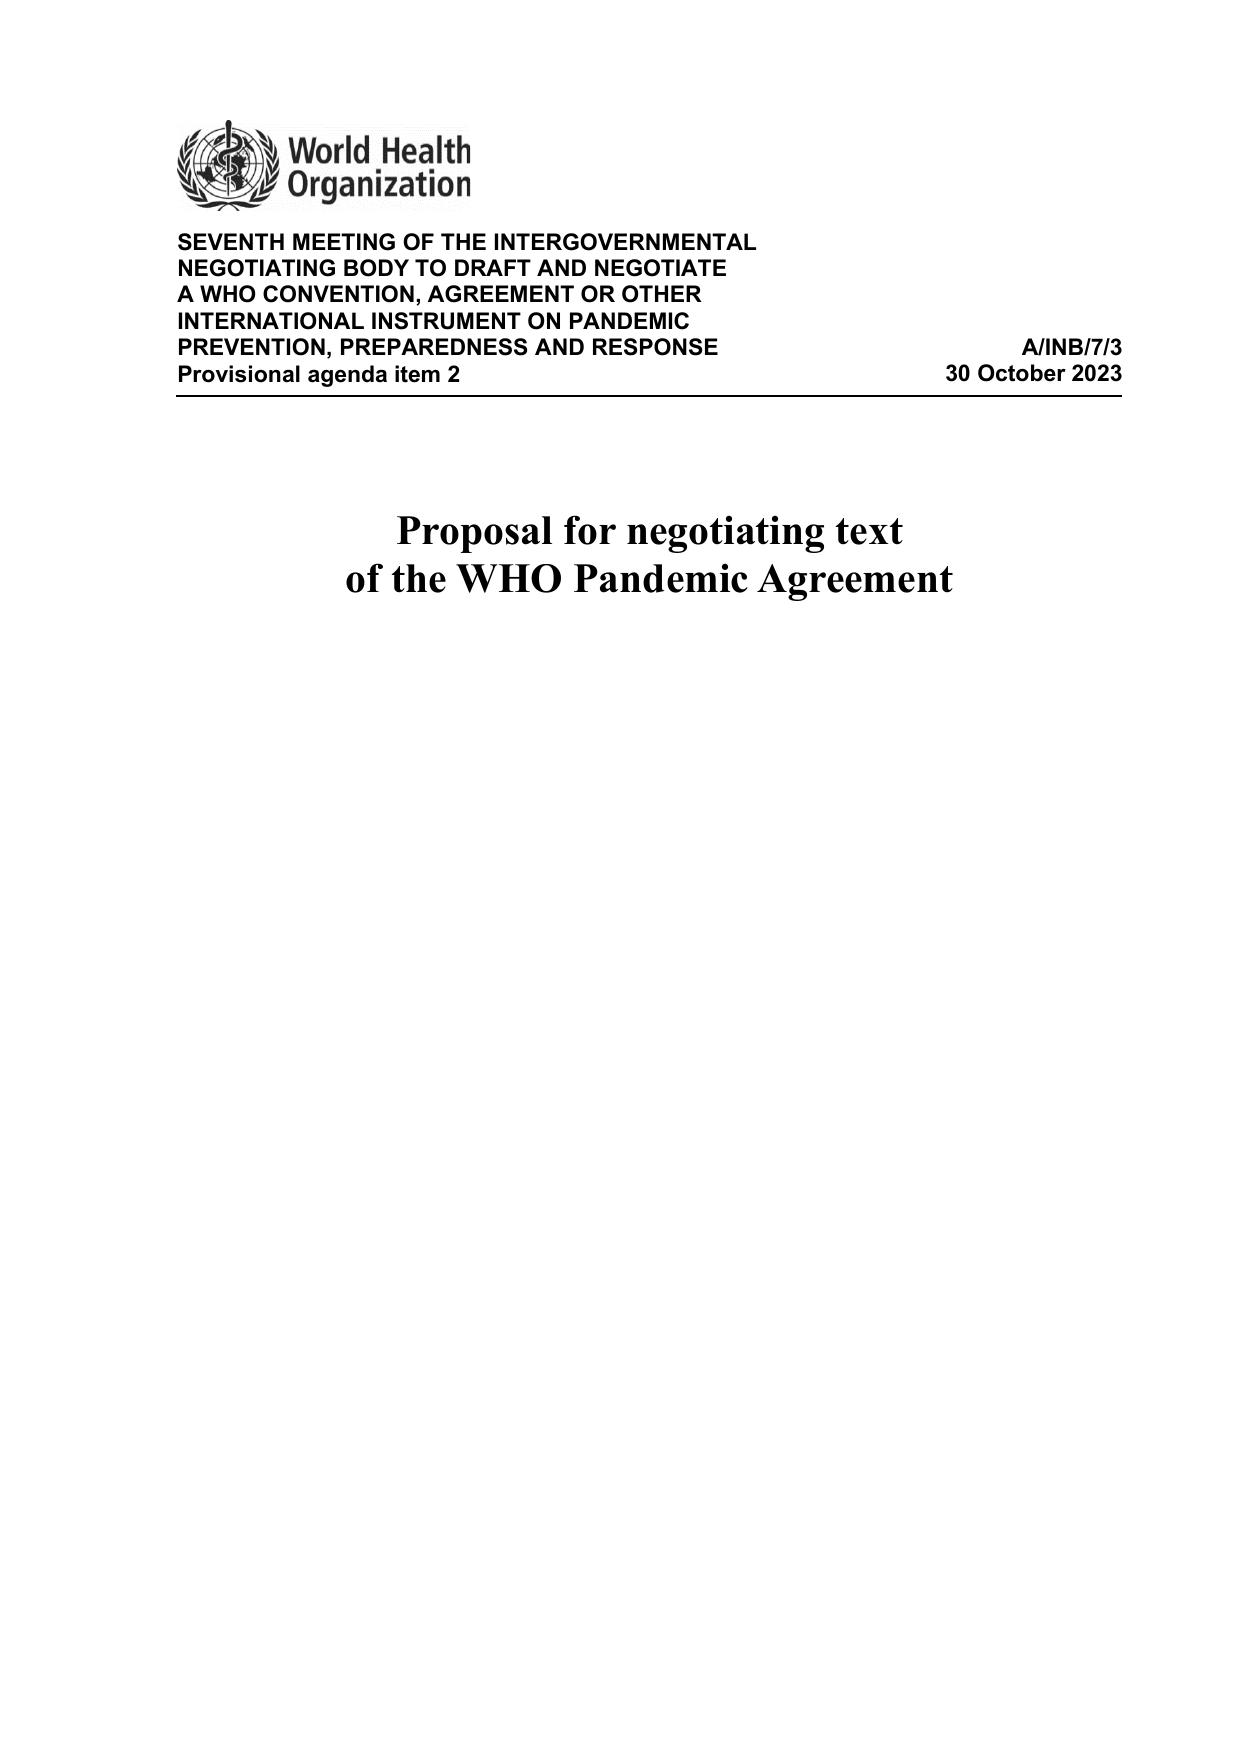 Proposal for negotiating text of the WHO Pandemic Agreement